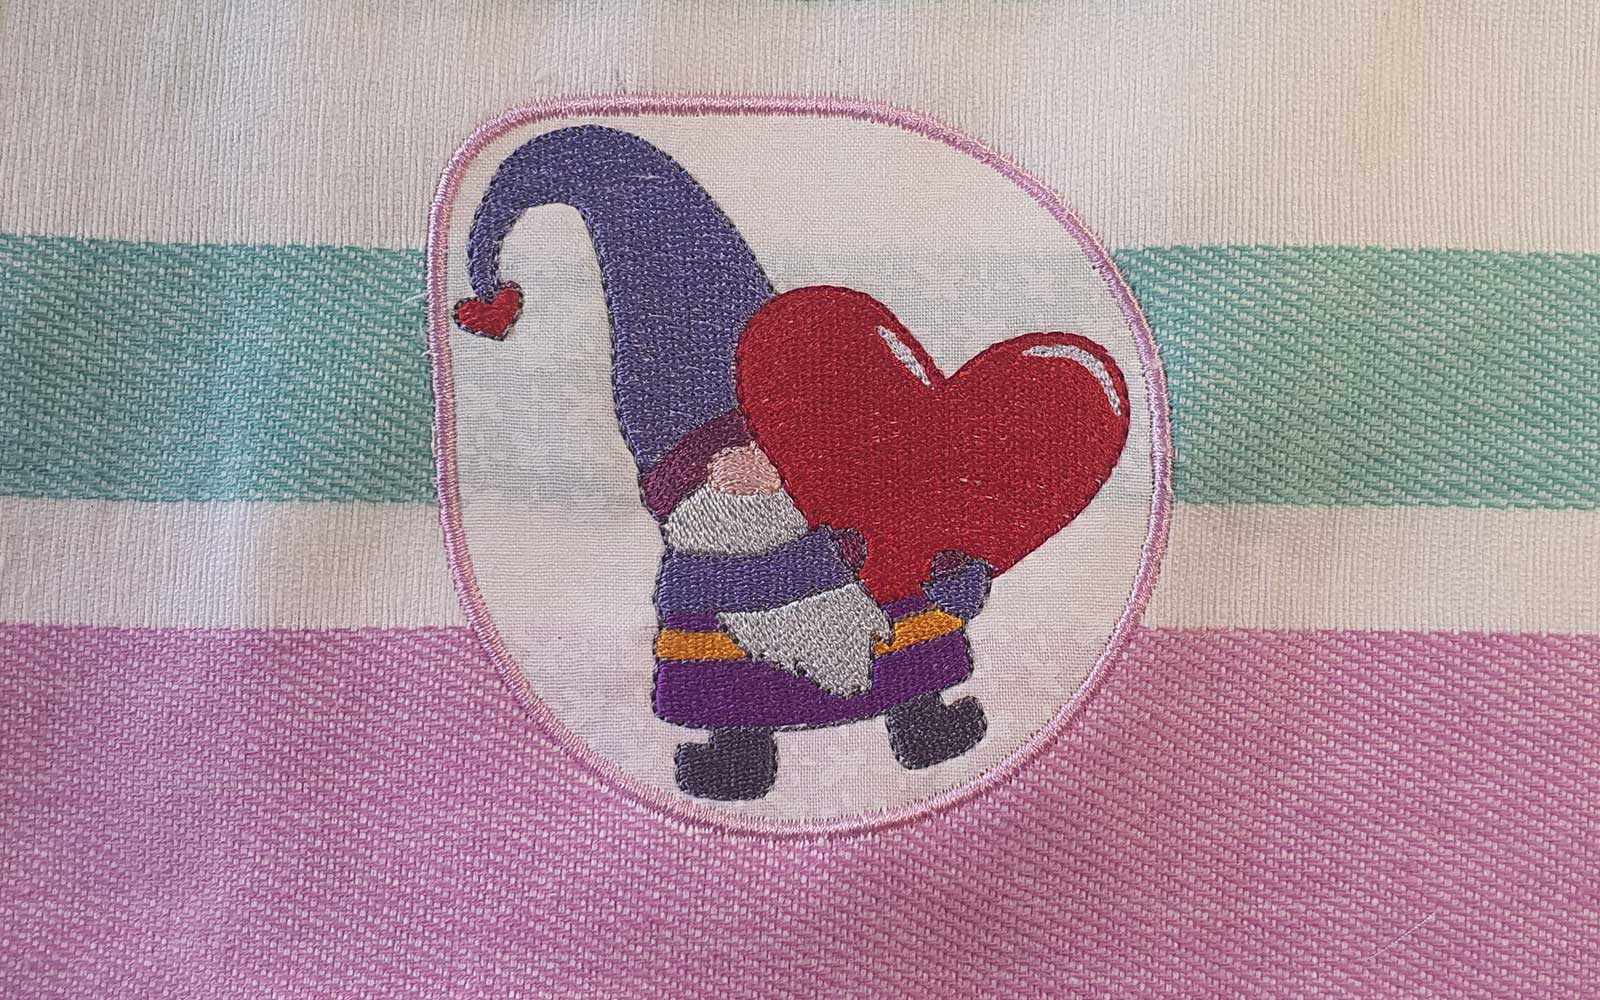 Embroidered gnome holding red heart on pink and green striped background 